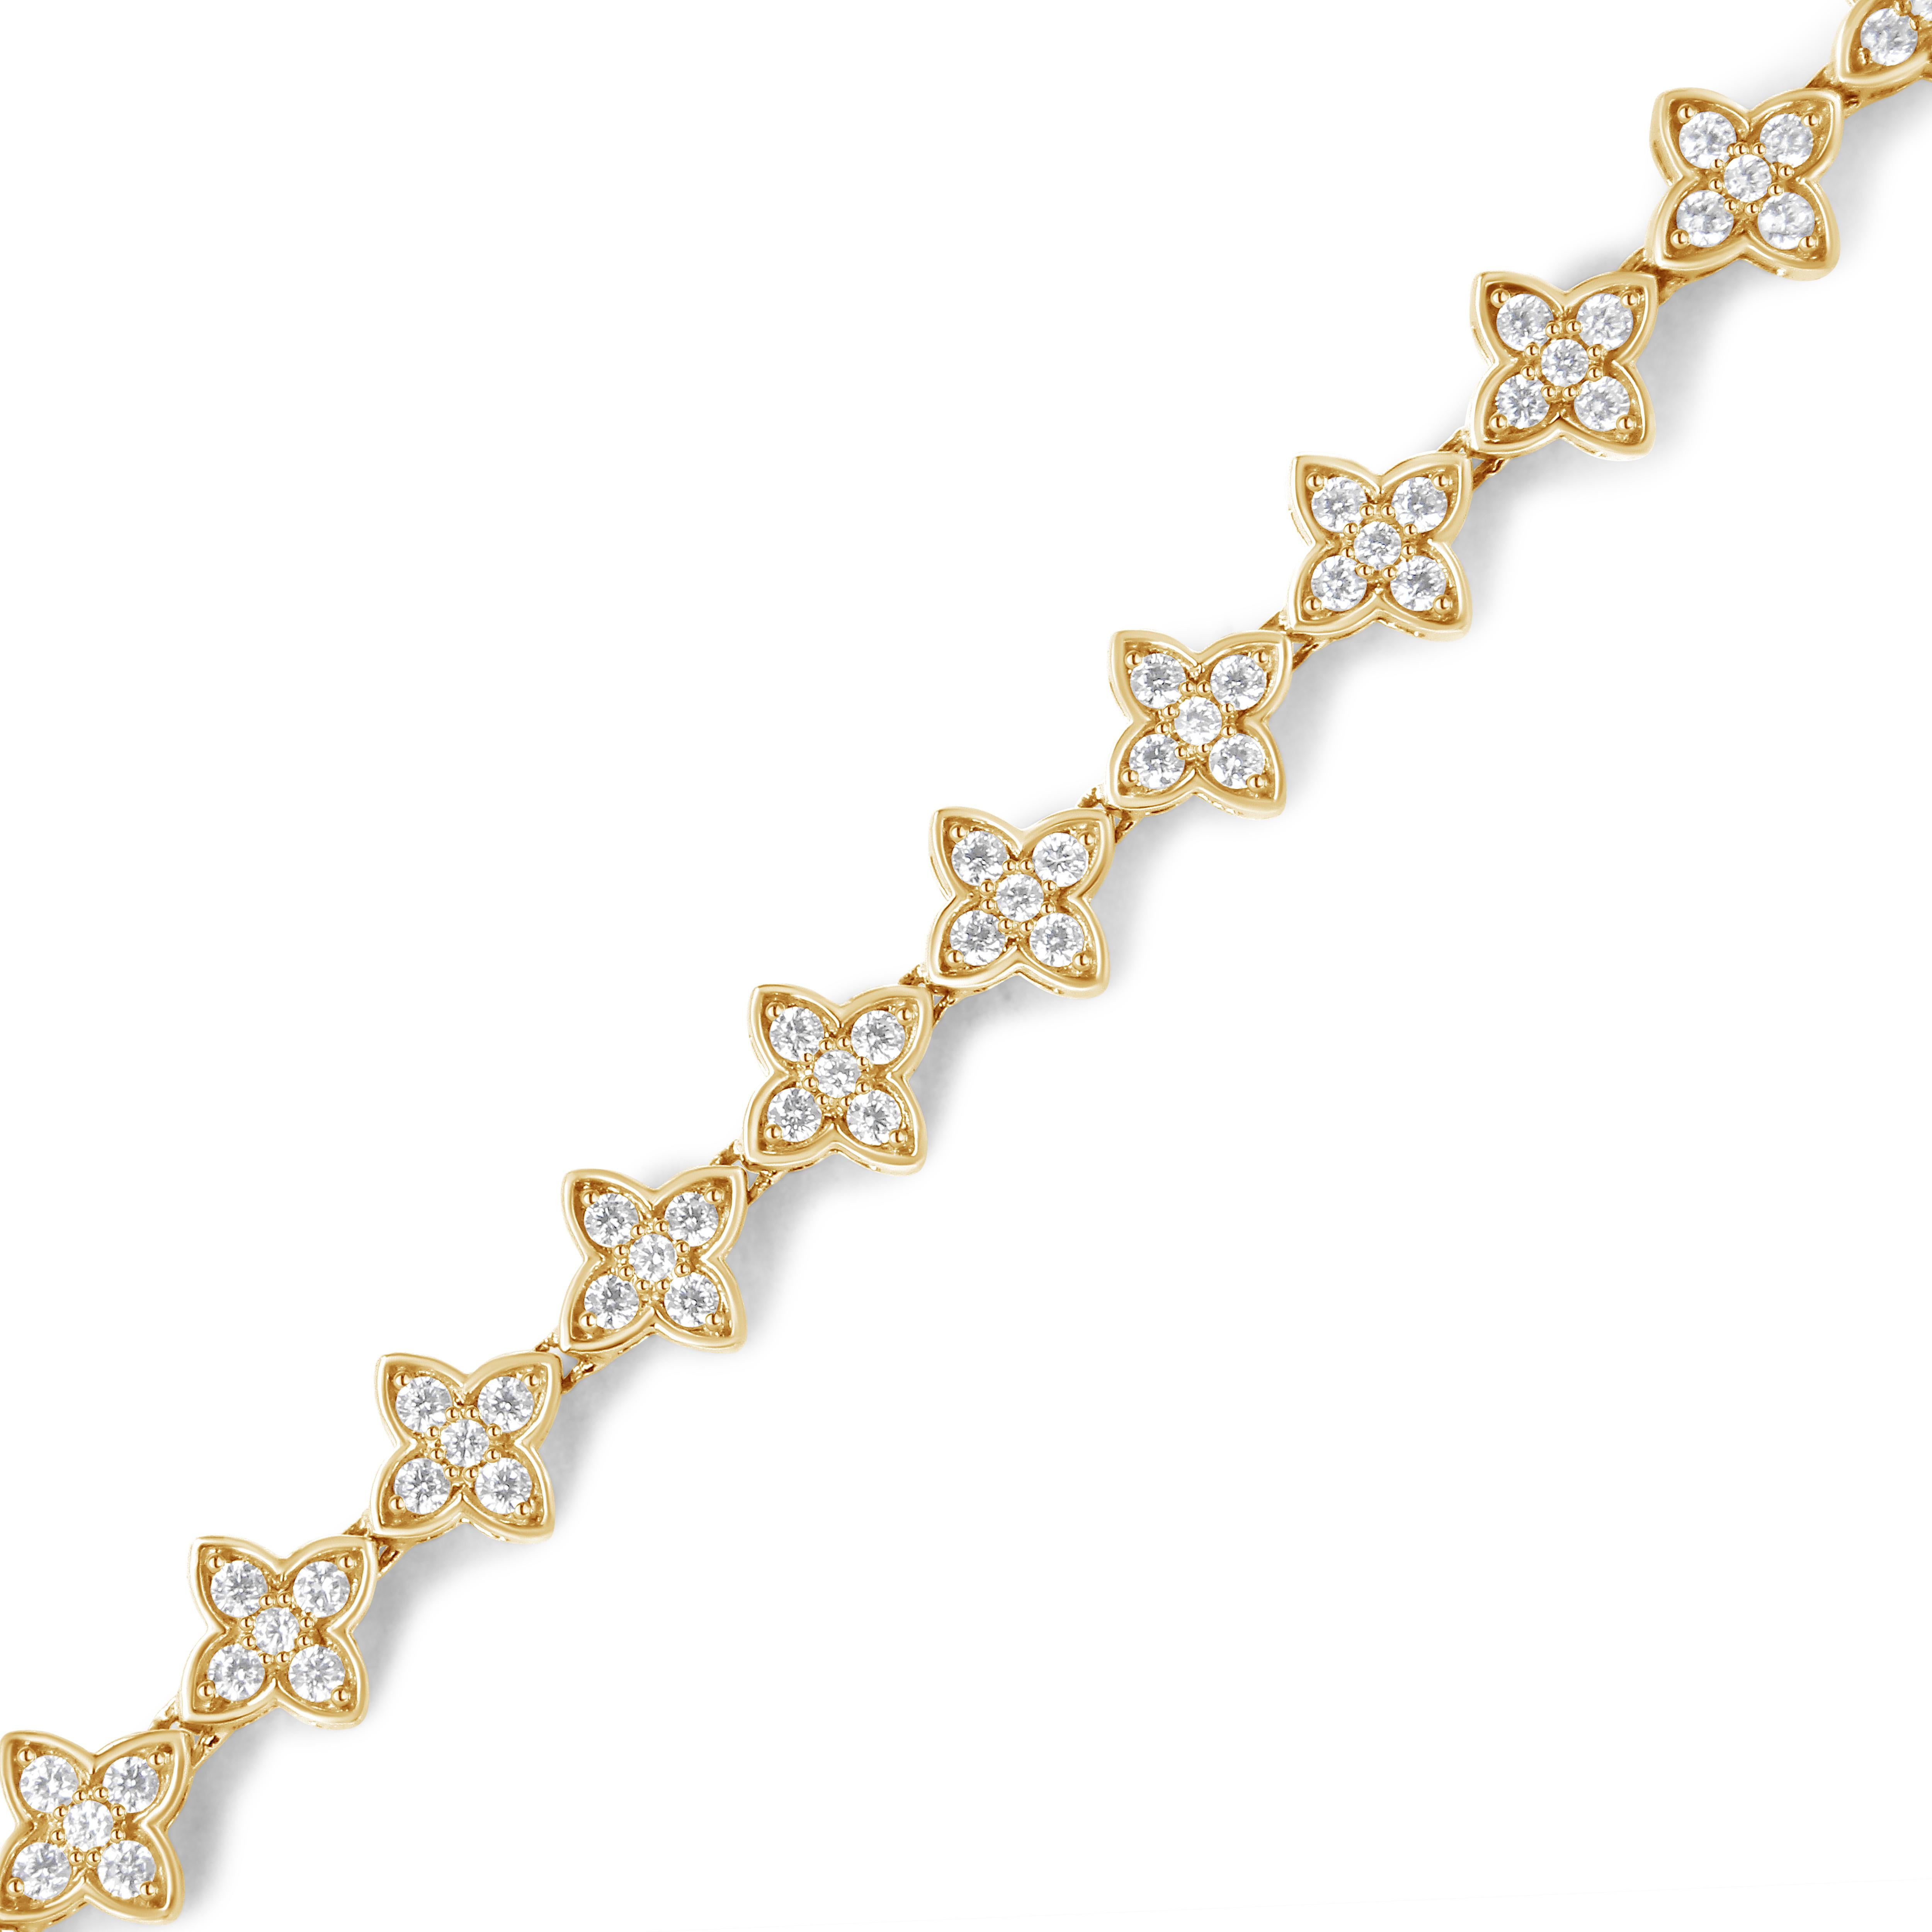 You will love this nature inspired link bracelet. Each flower link is inlaid with 5 glimmering round cut diamonds. This bracelet holds 2ct TDW of diamonds and is crafted in 10k yellow gold. A box with clasp mechanism keeps the bracelet secure and